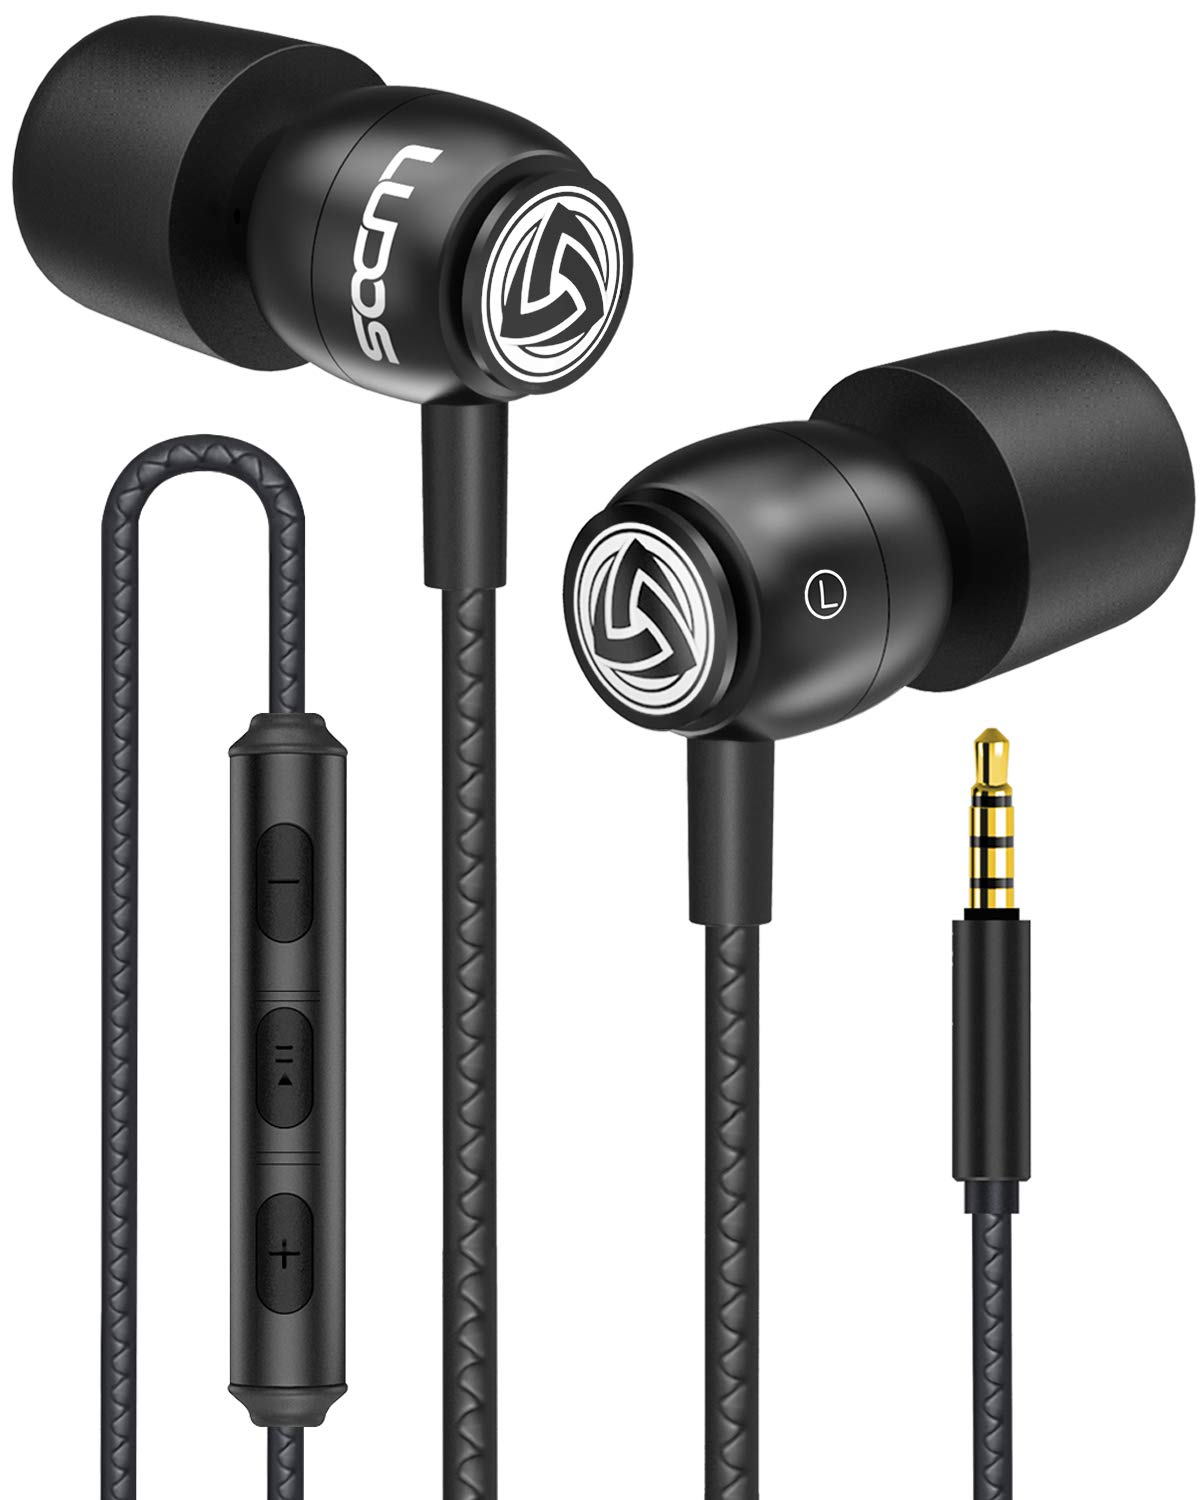 LUDOS Clamor Wired Earbuds in Ear, Noise Isolating Headphones with Microphone, Earphones with Mic and Volume Control, Memory Foam, Bass Ear Buds Compatible with iPhone, Apple, iPad, Computer - Black